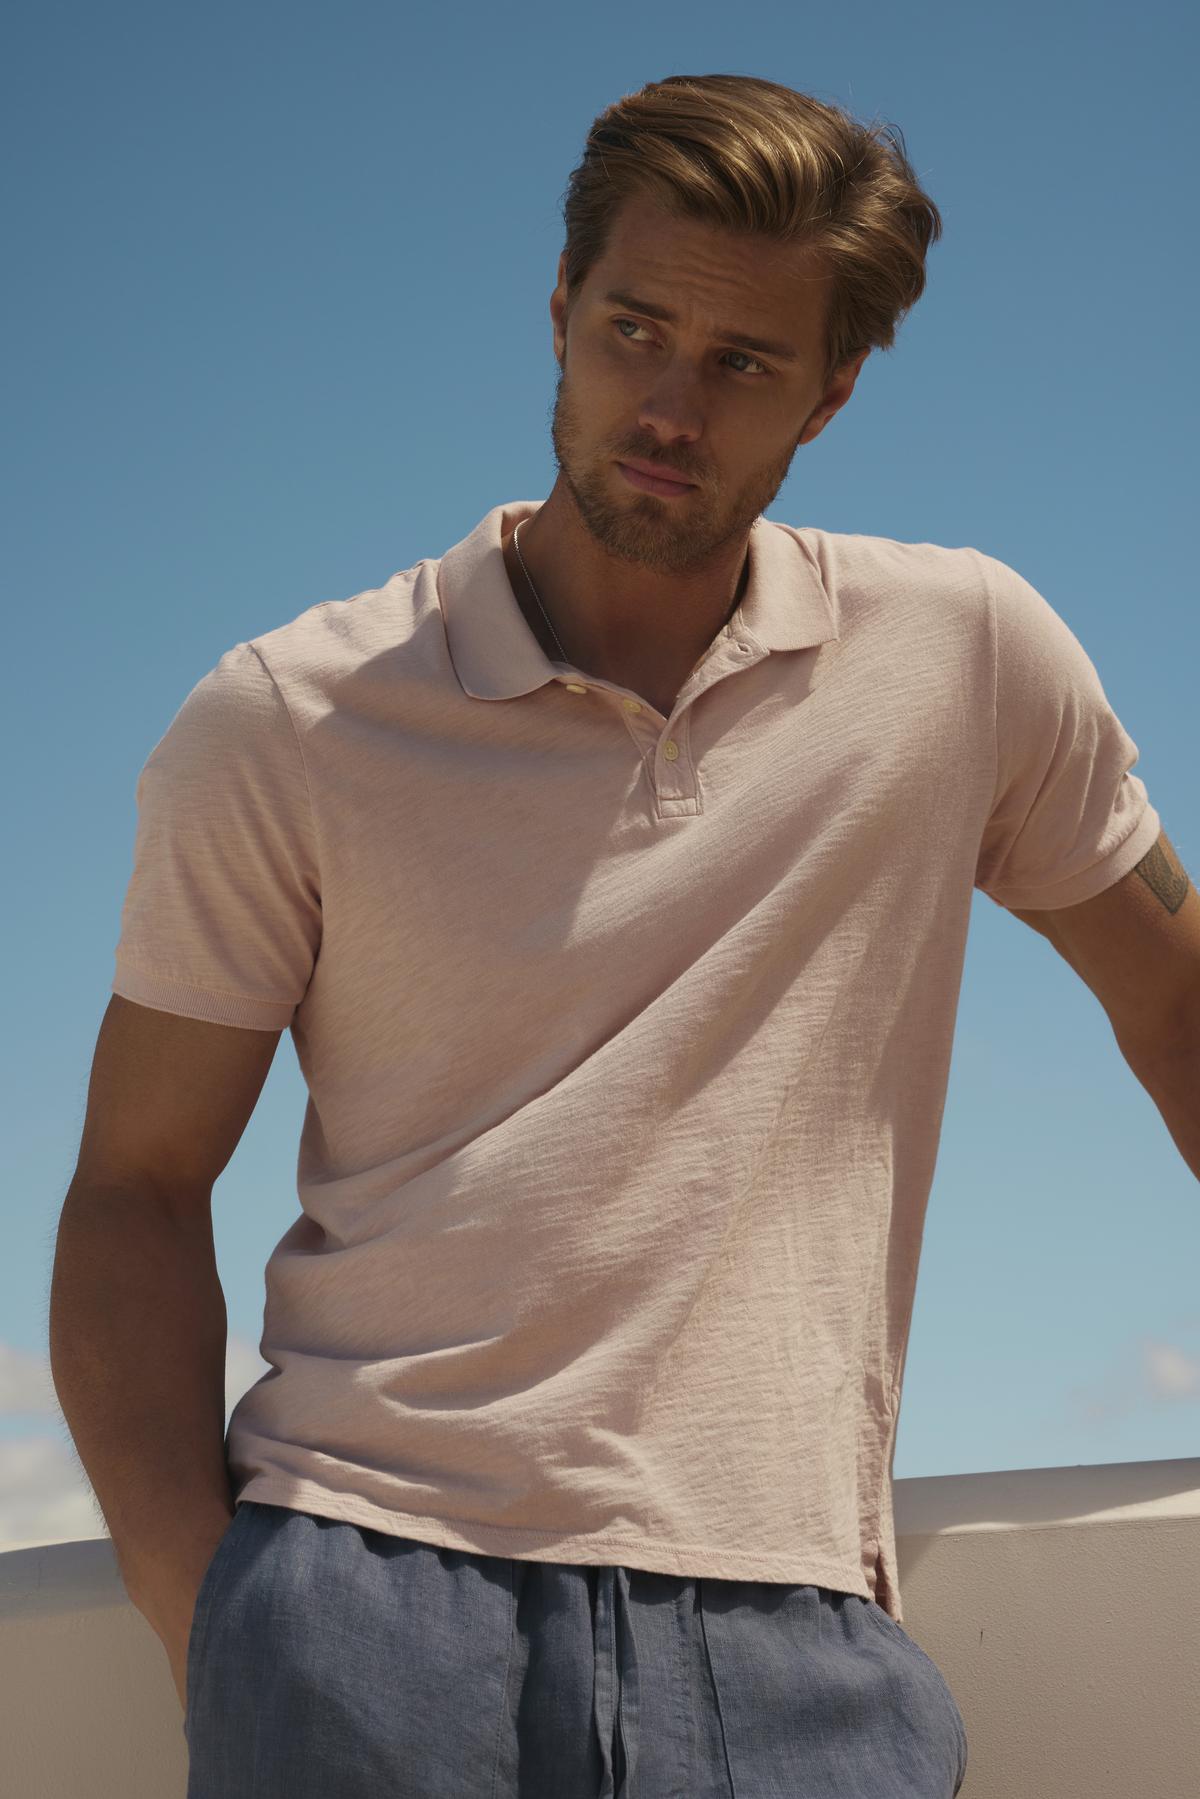 Man in a Velvet by Graham & Spencer NIKO POLO shirt and blue pants standing outdoors, looking away thoughtfully under a clear blue sky.-36753554538689